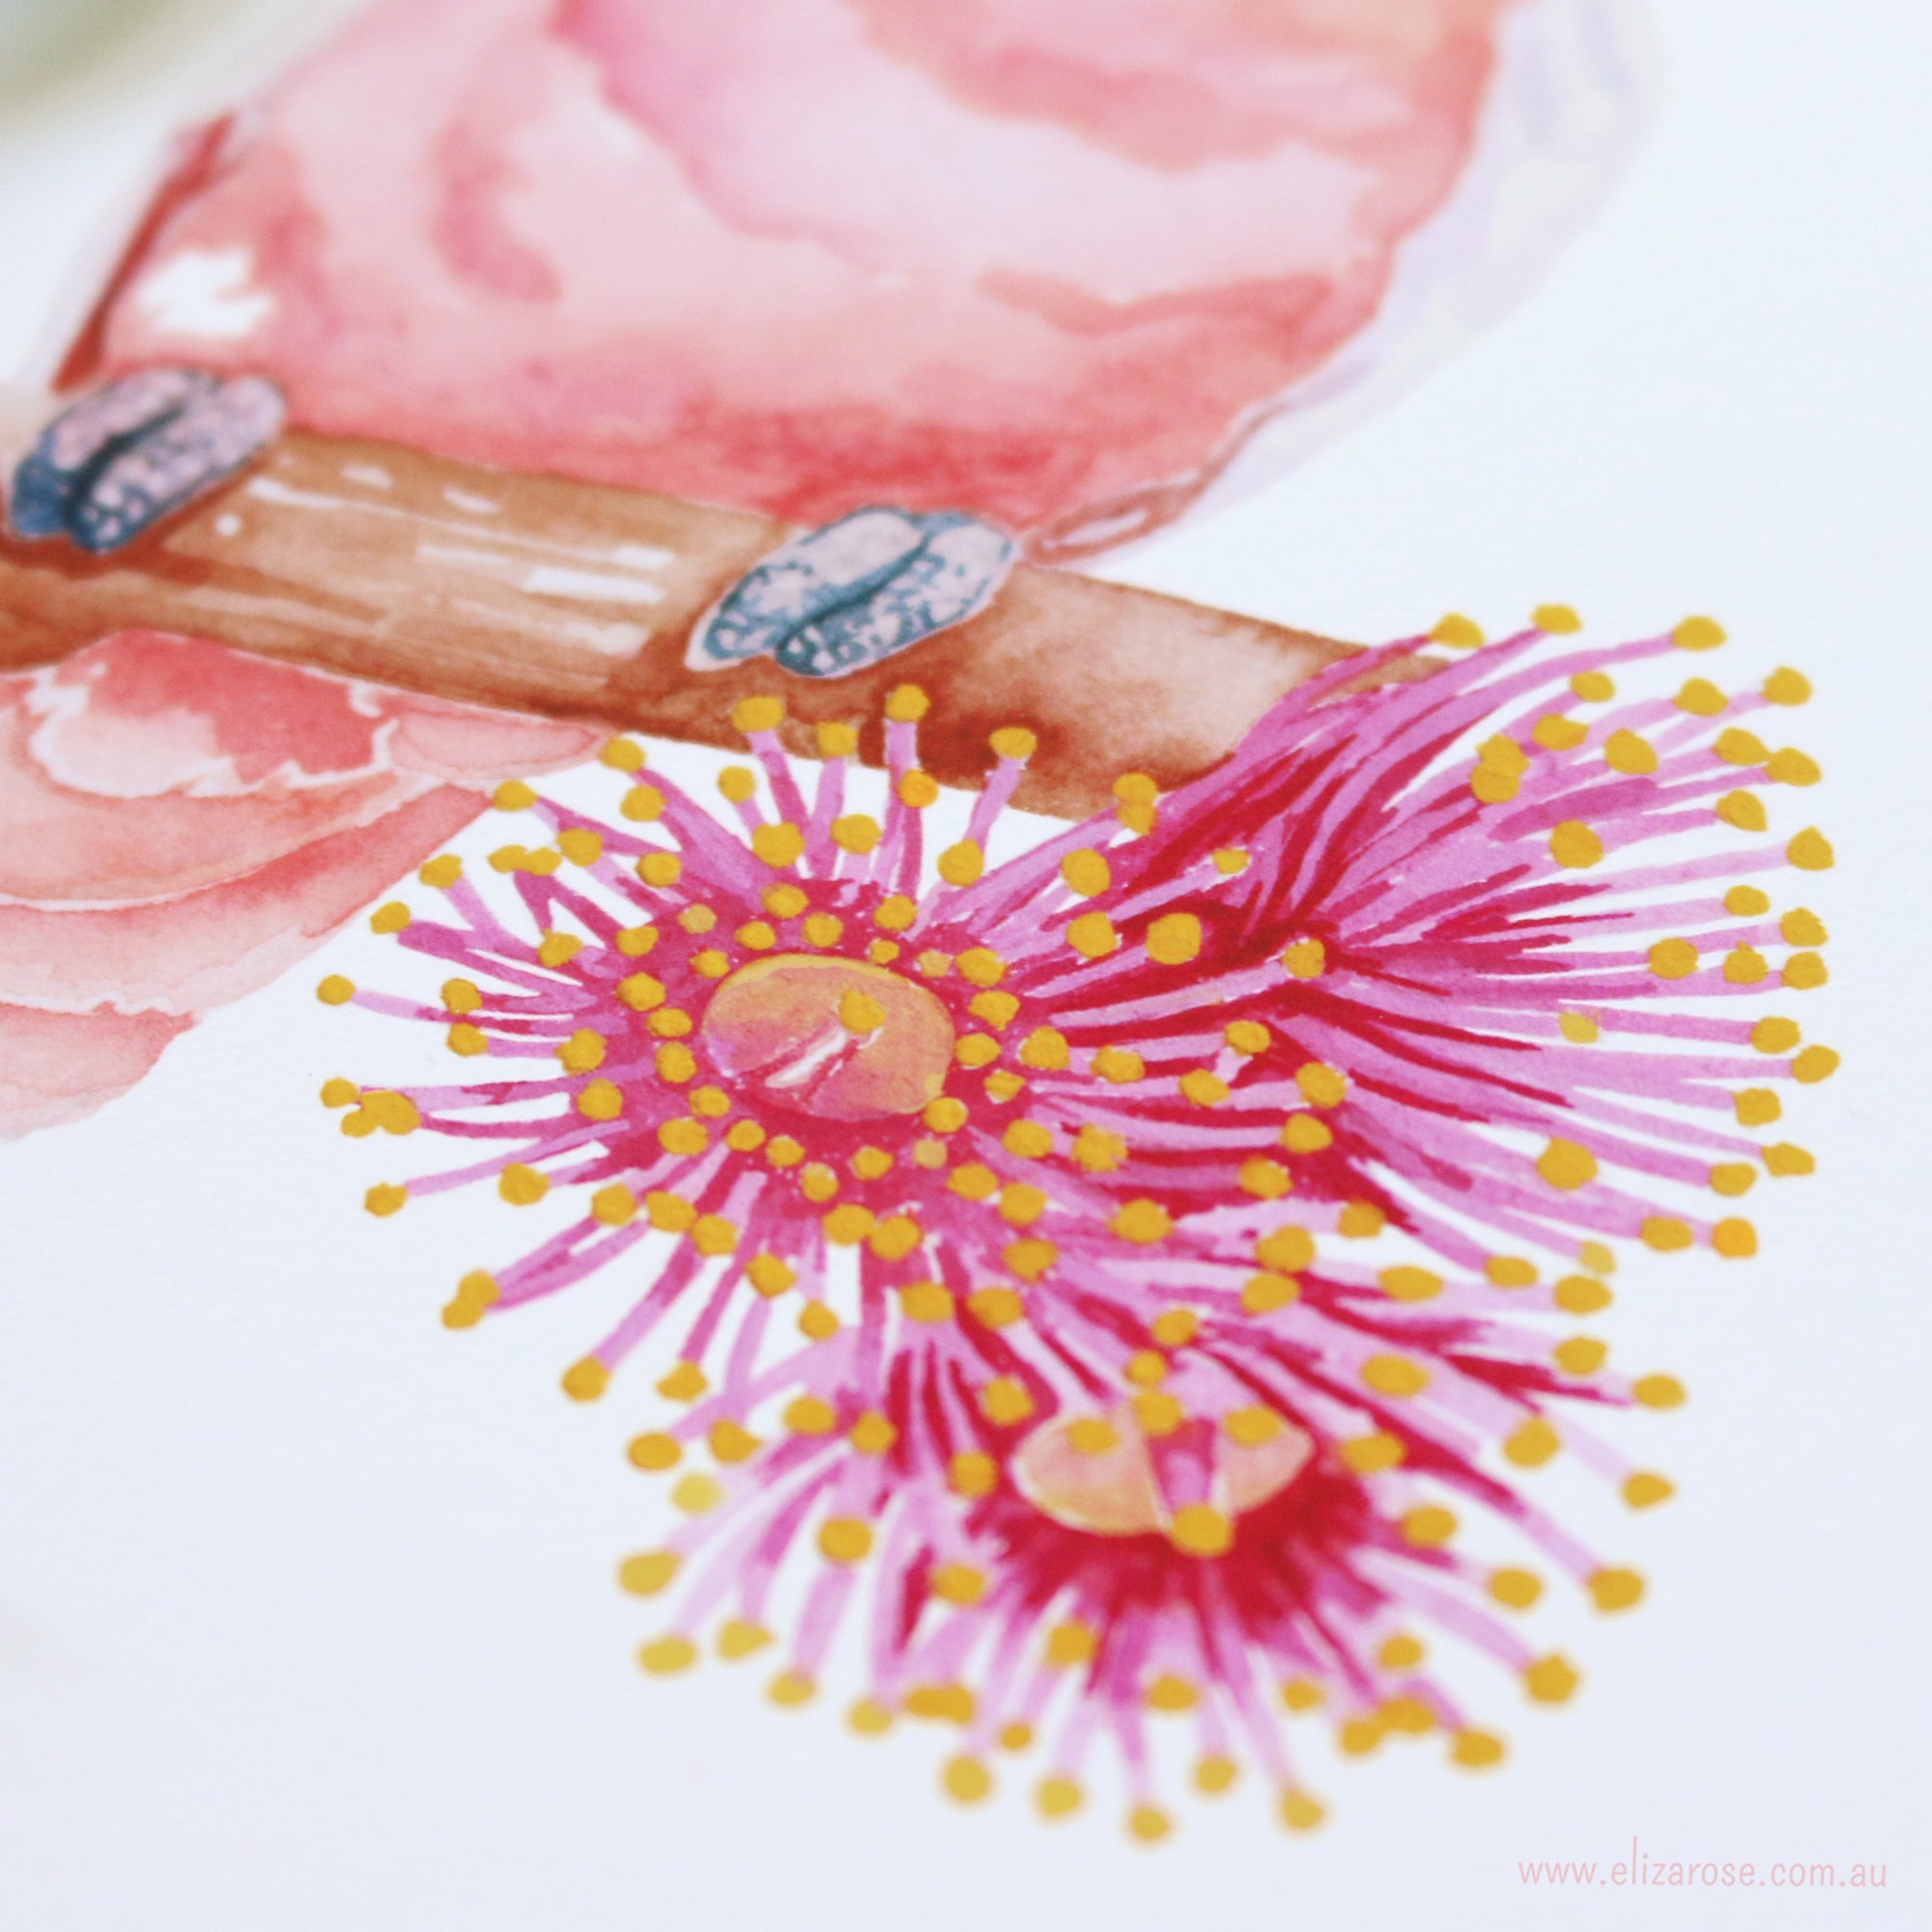 Pink Cockatoo & Flowering Gum || Limited Edition Giclee Print